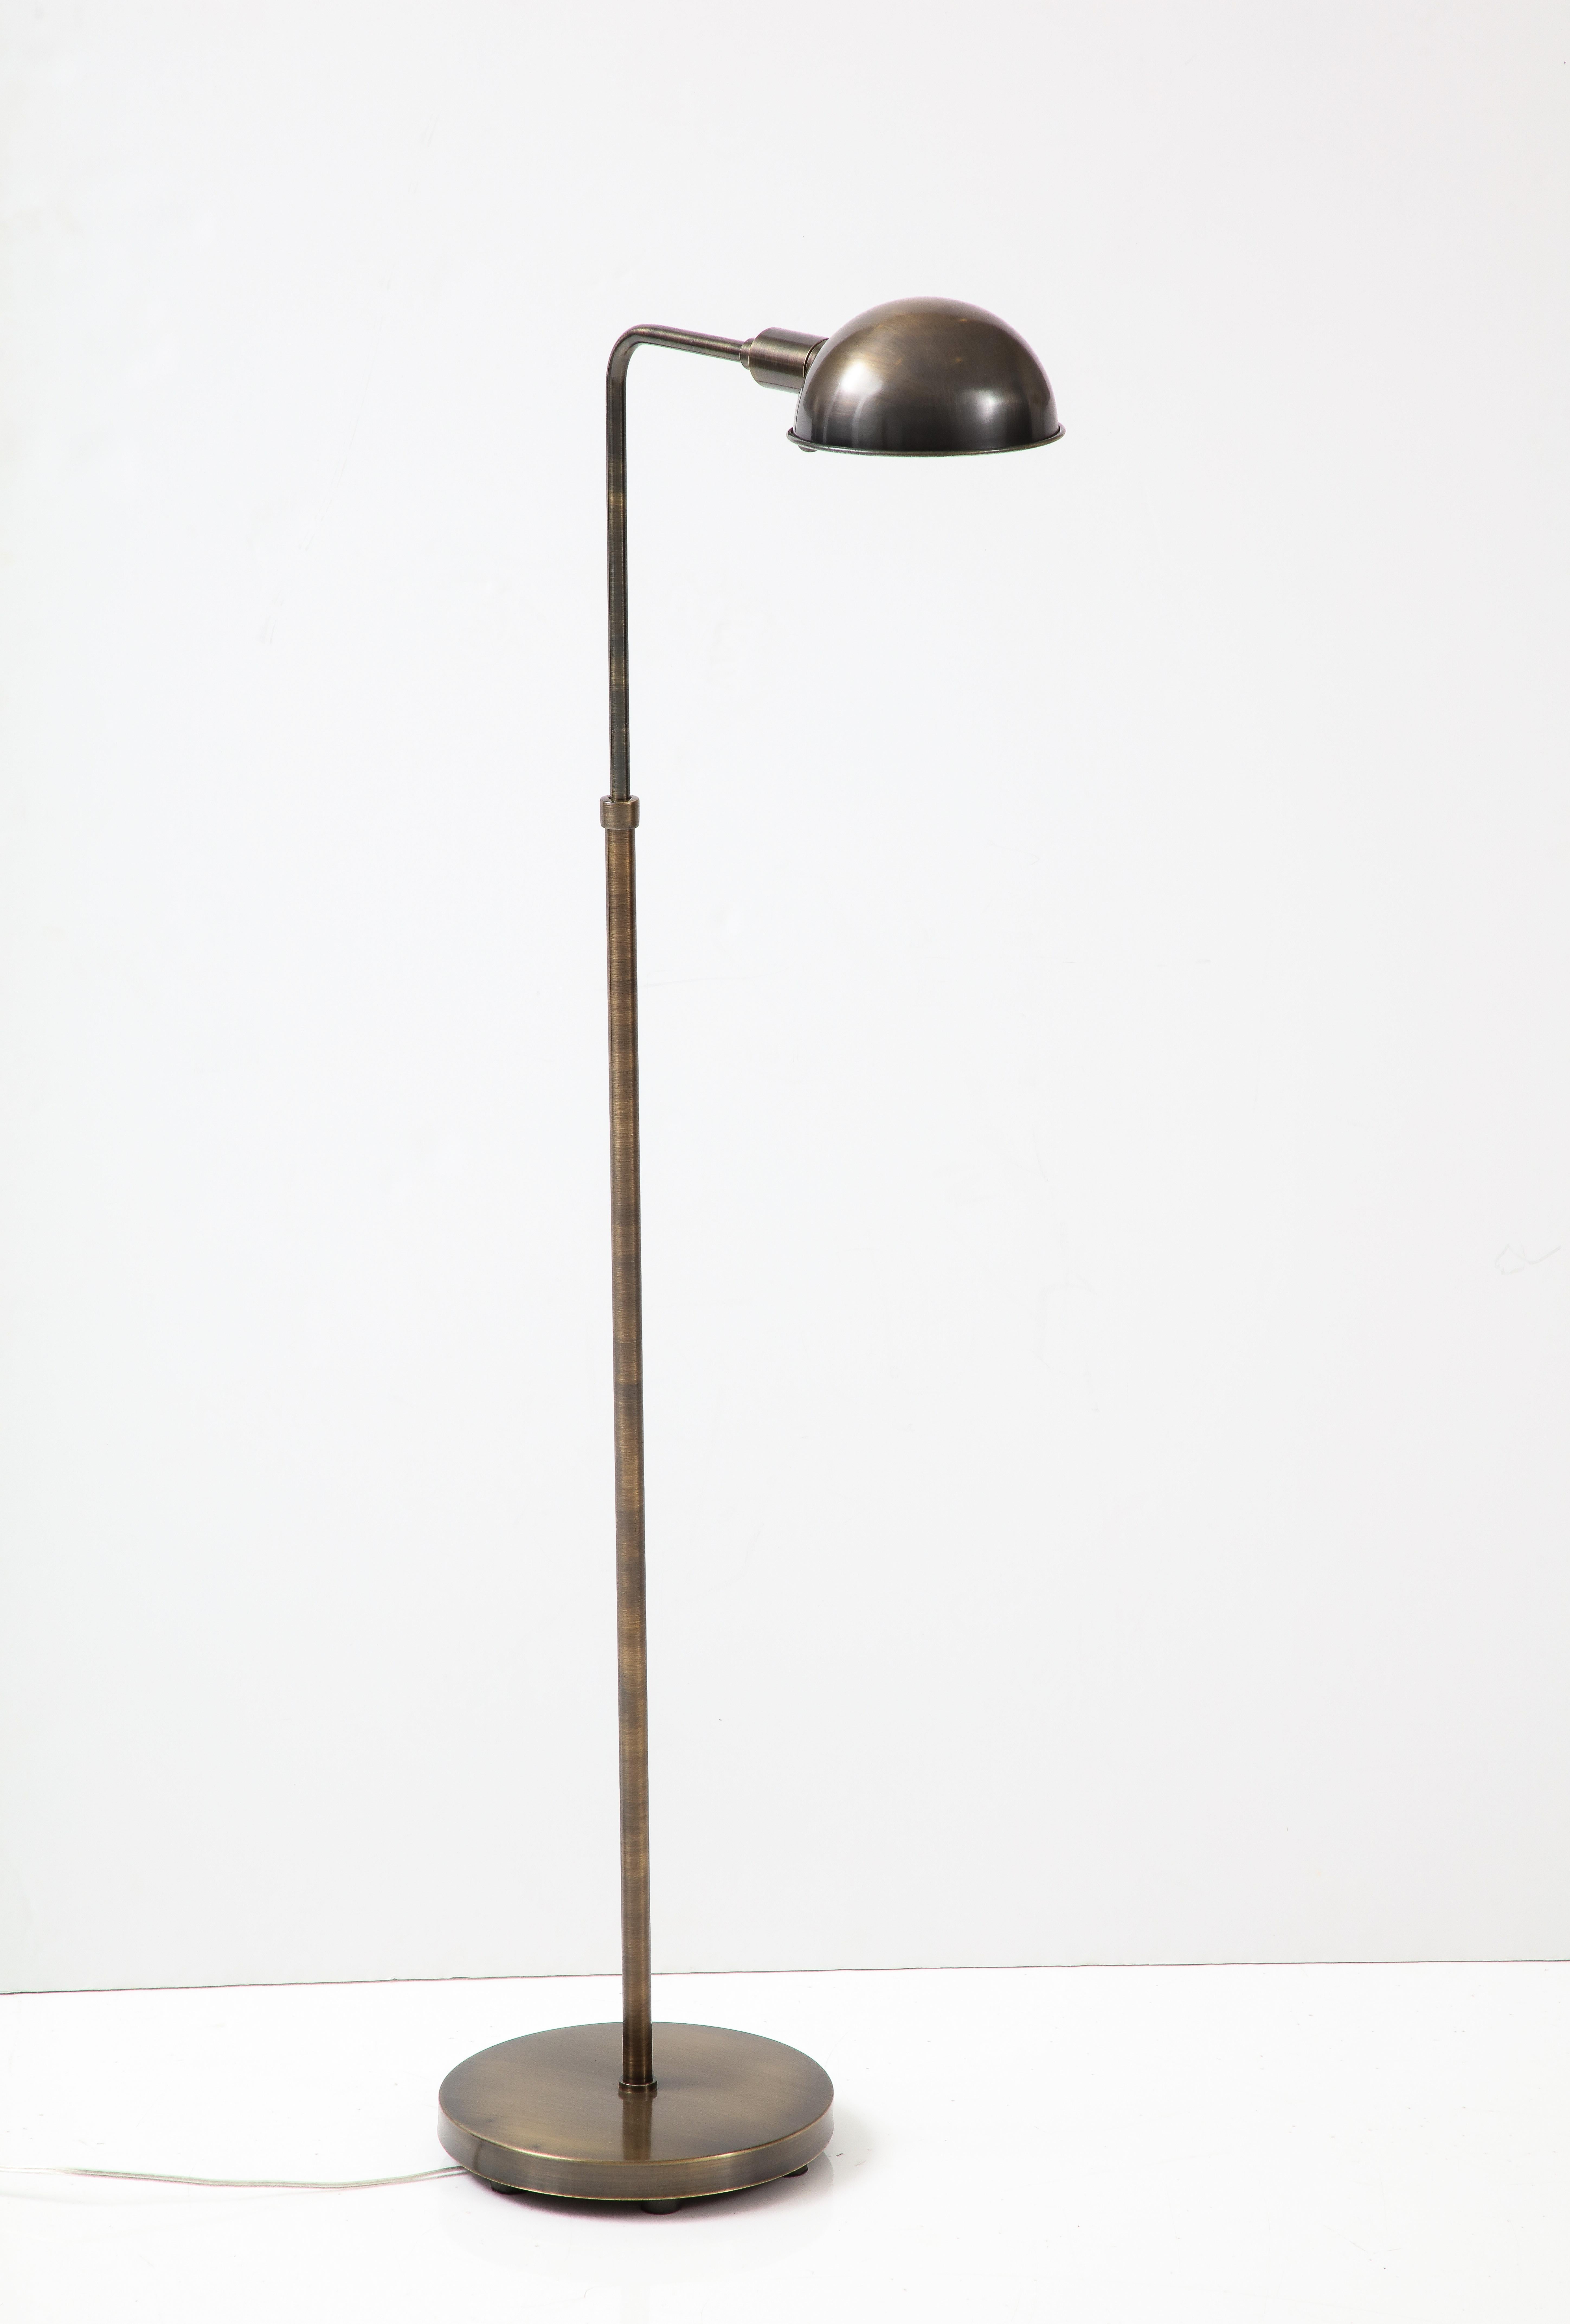 Mid-Century Modern adjustable apothecary floor lamp in a bronzed brass finish. Rewired for use in the USA. 75W max, edison bulb.